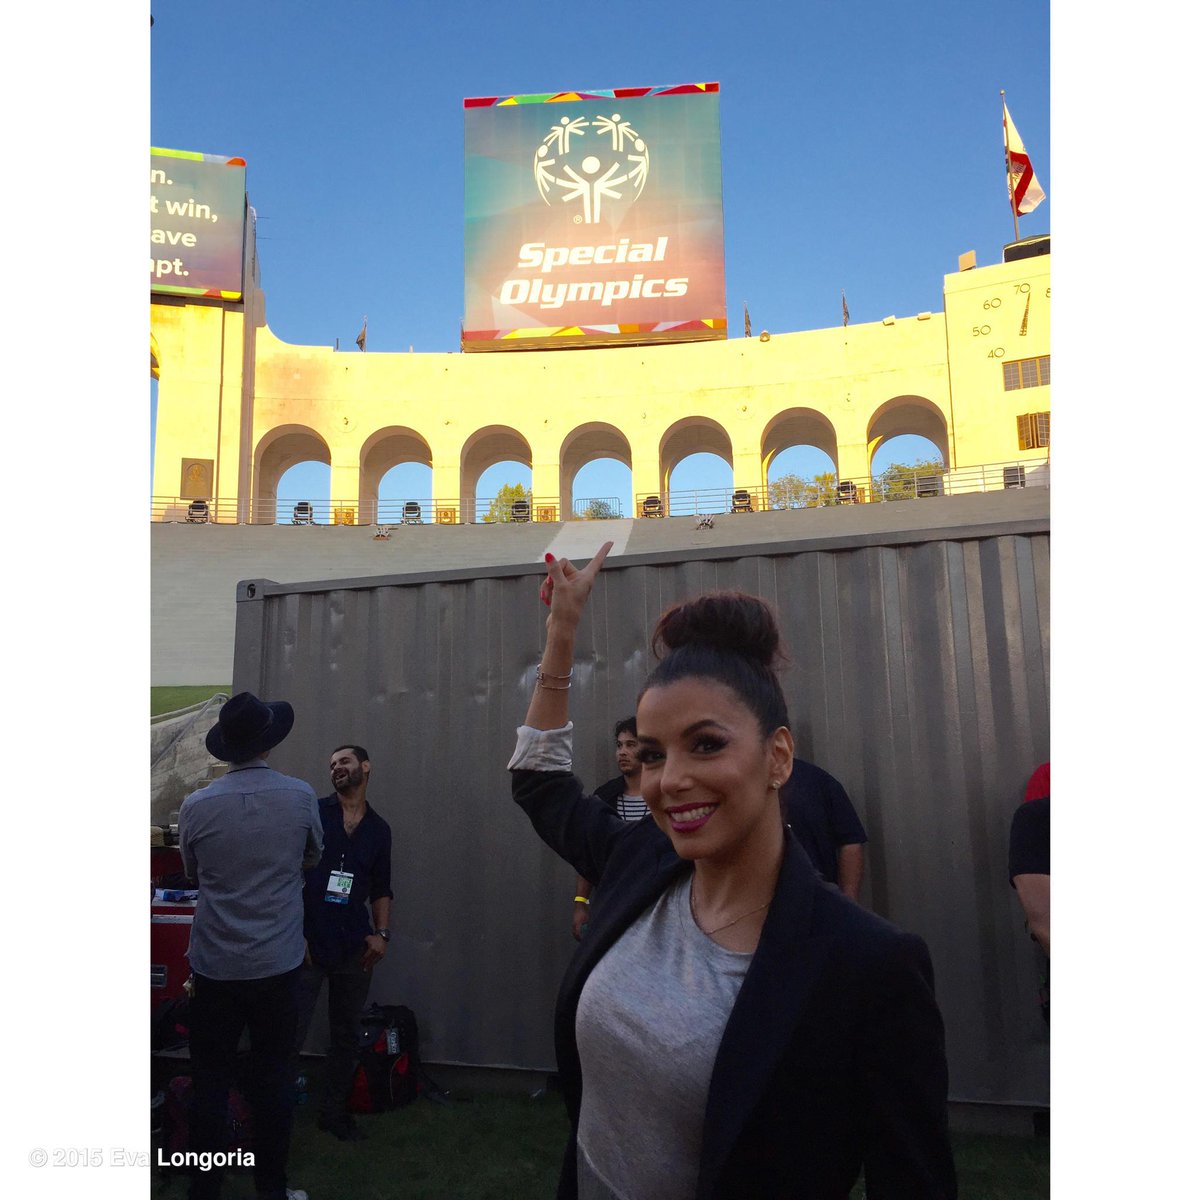 So honored to be presenting at the #SpecialOlympics #WorldGames #LosAngeles 2015! http://t.co/voOXeY23Hj